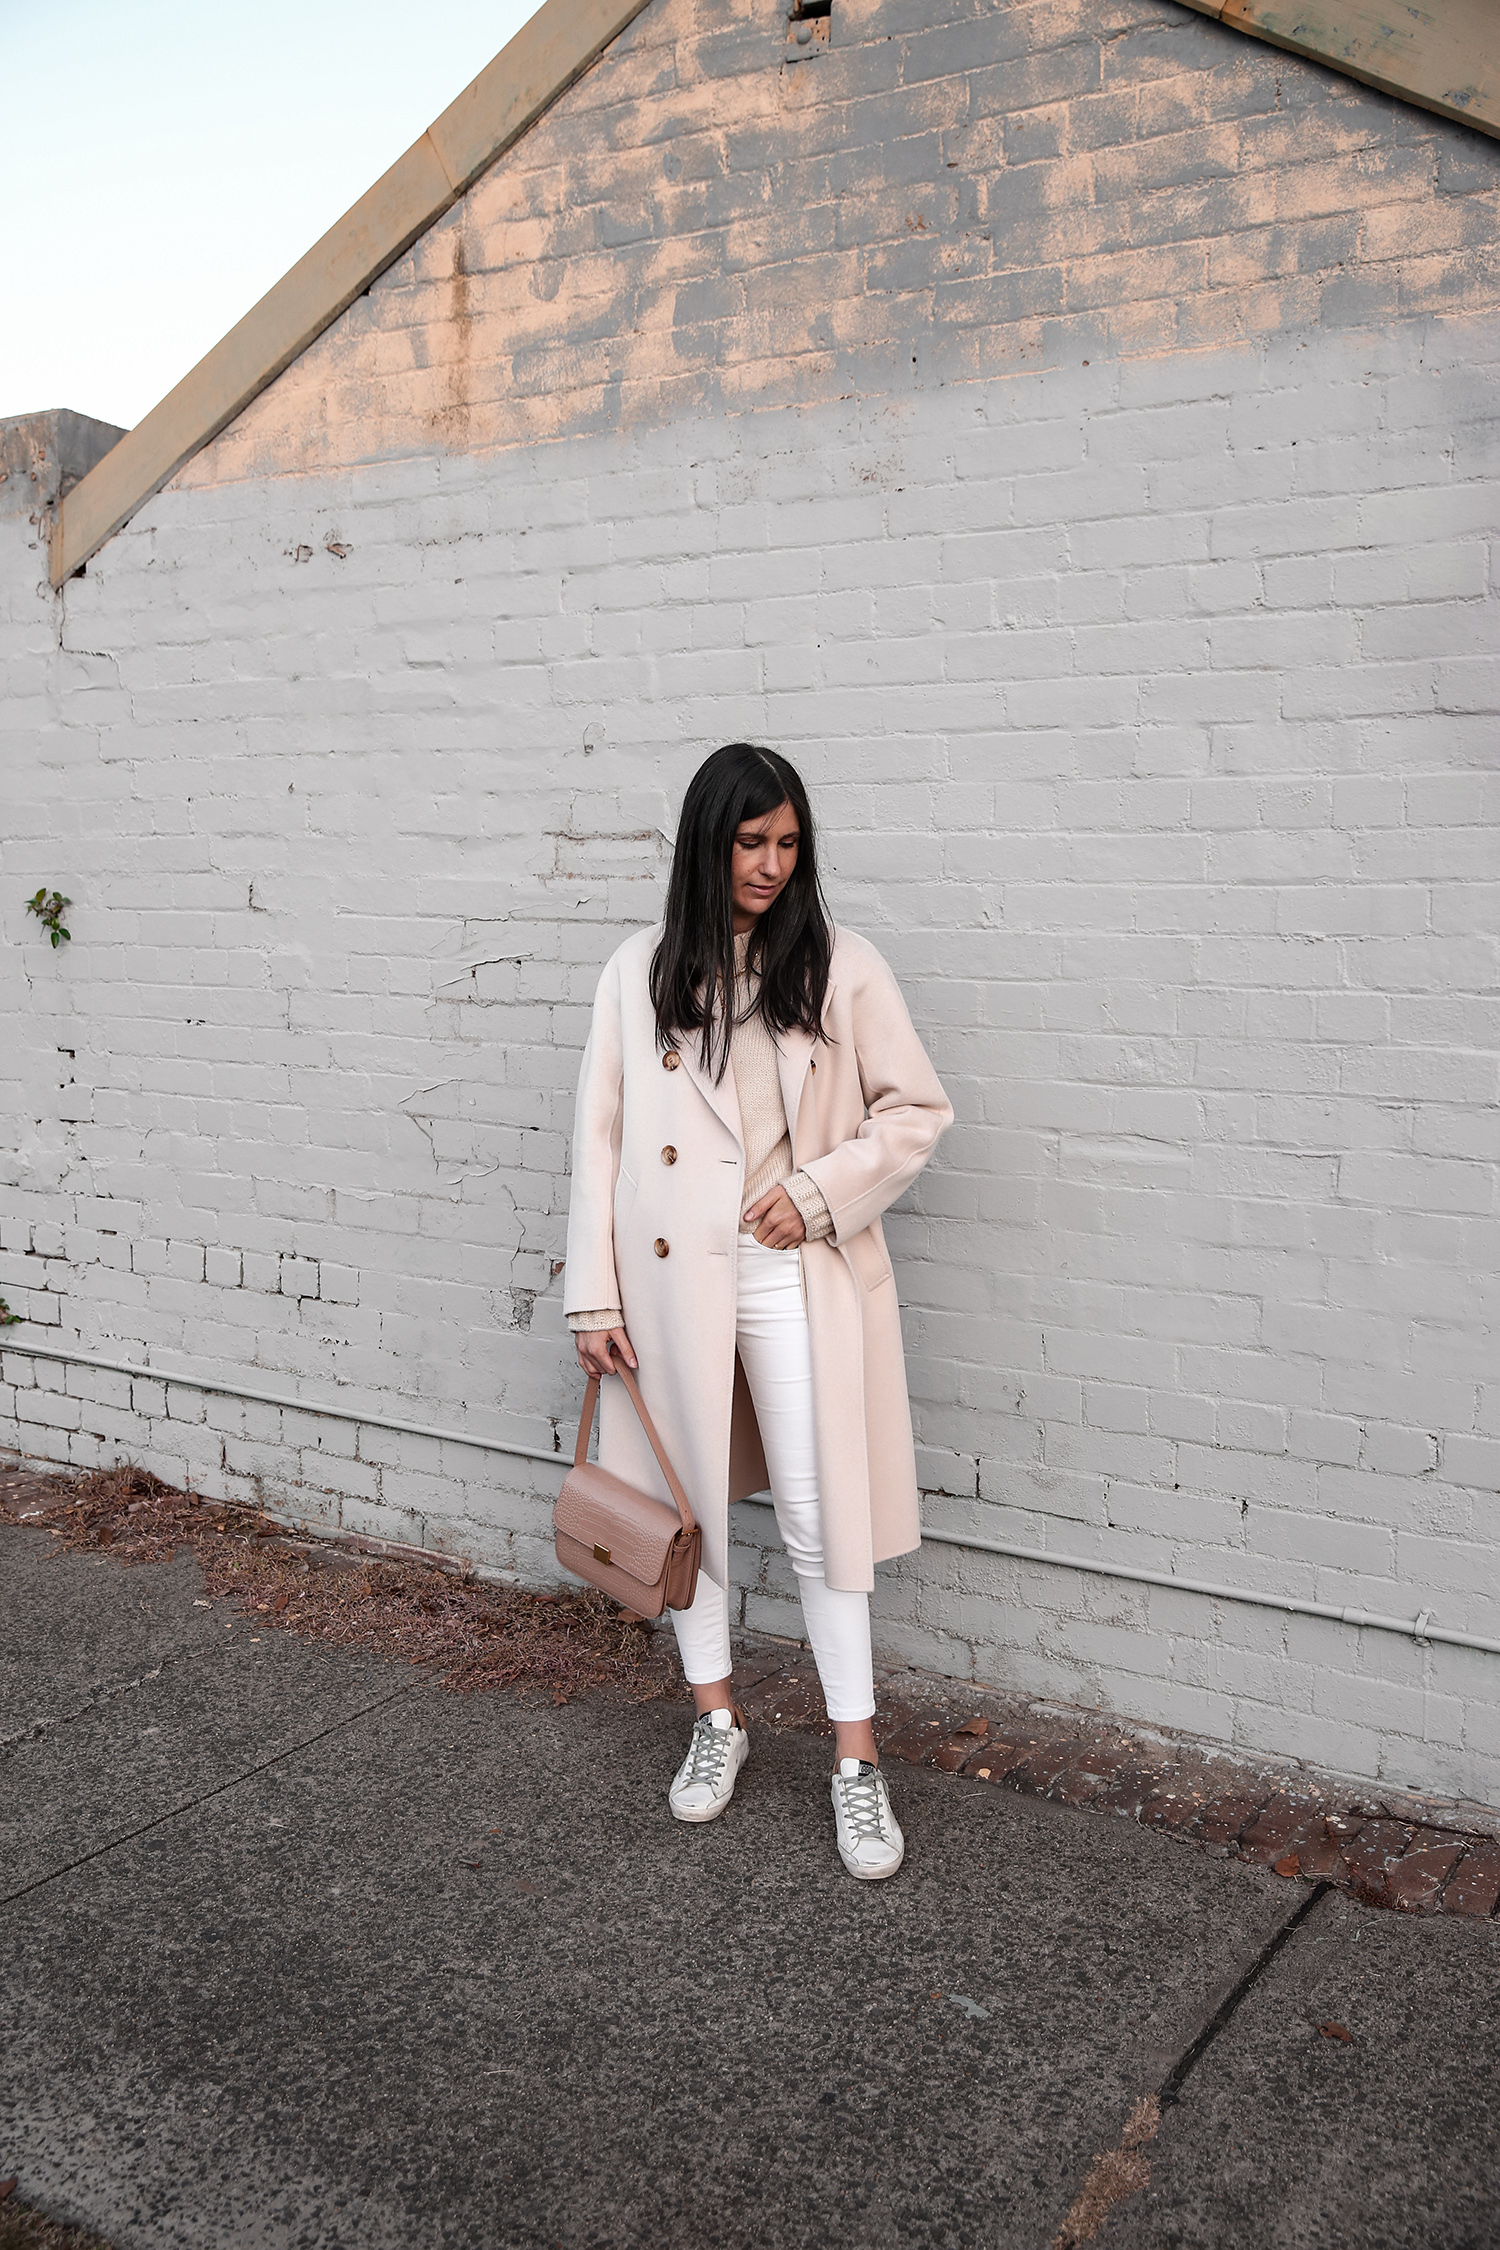 Jamie Lee of Mademoiselle wearing The Curated coat with neutral tones - scandi style